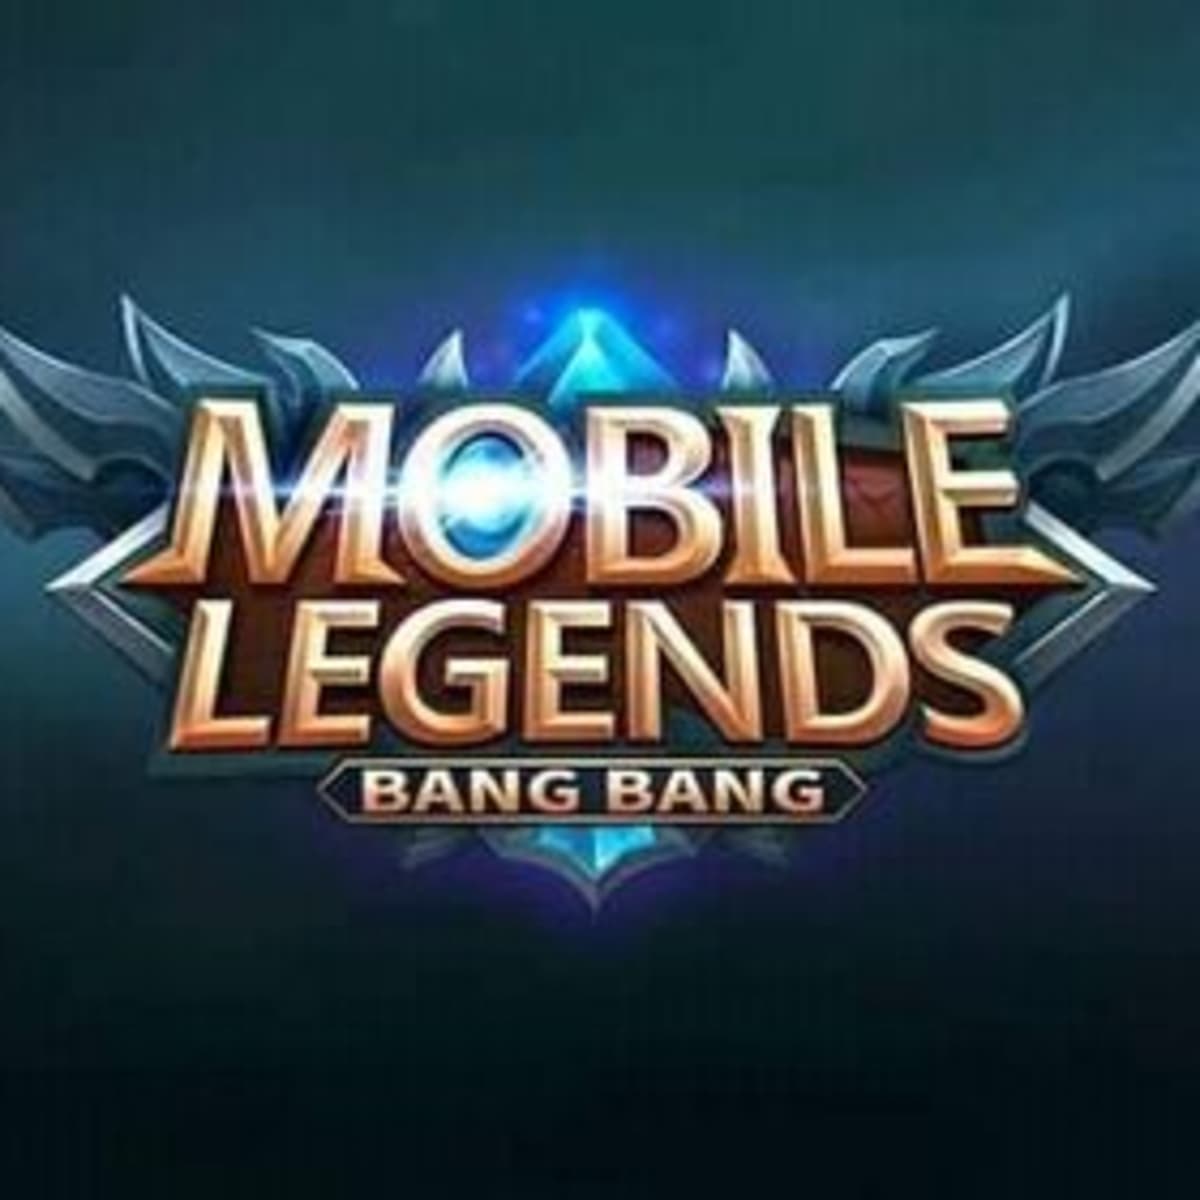 Mobile Legends: Bang Bang - 🤩Expecting a brand new look for your main?  Here's the chance! 😉Log in and vote for your hero NOW! 🥰We will design a  Legendary Skin for the